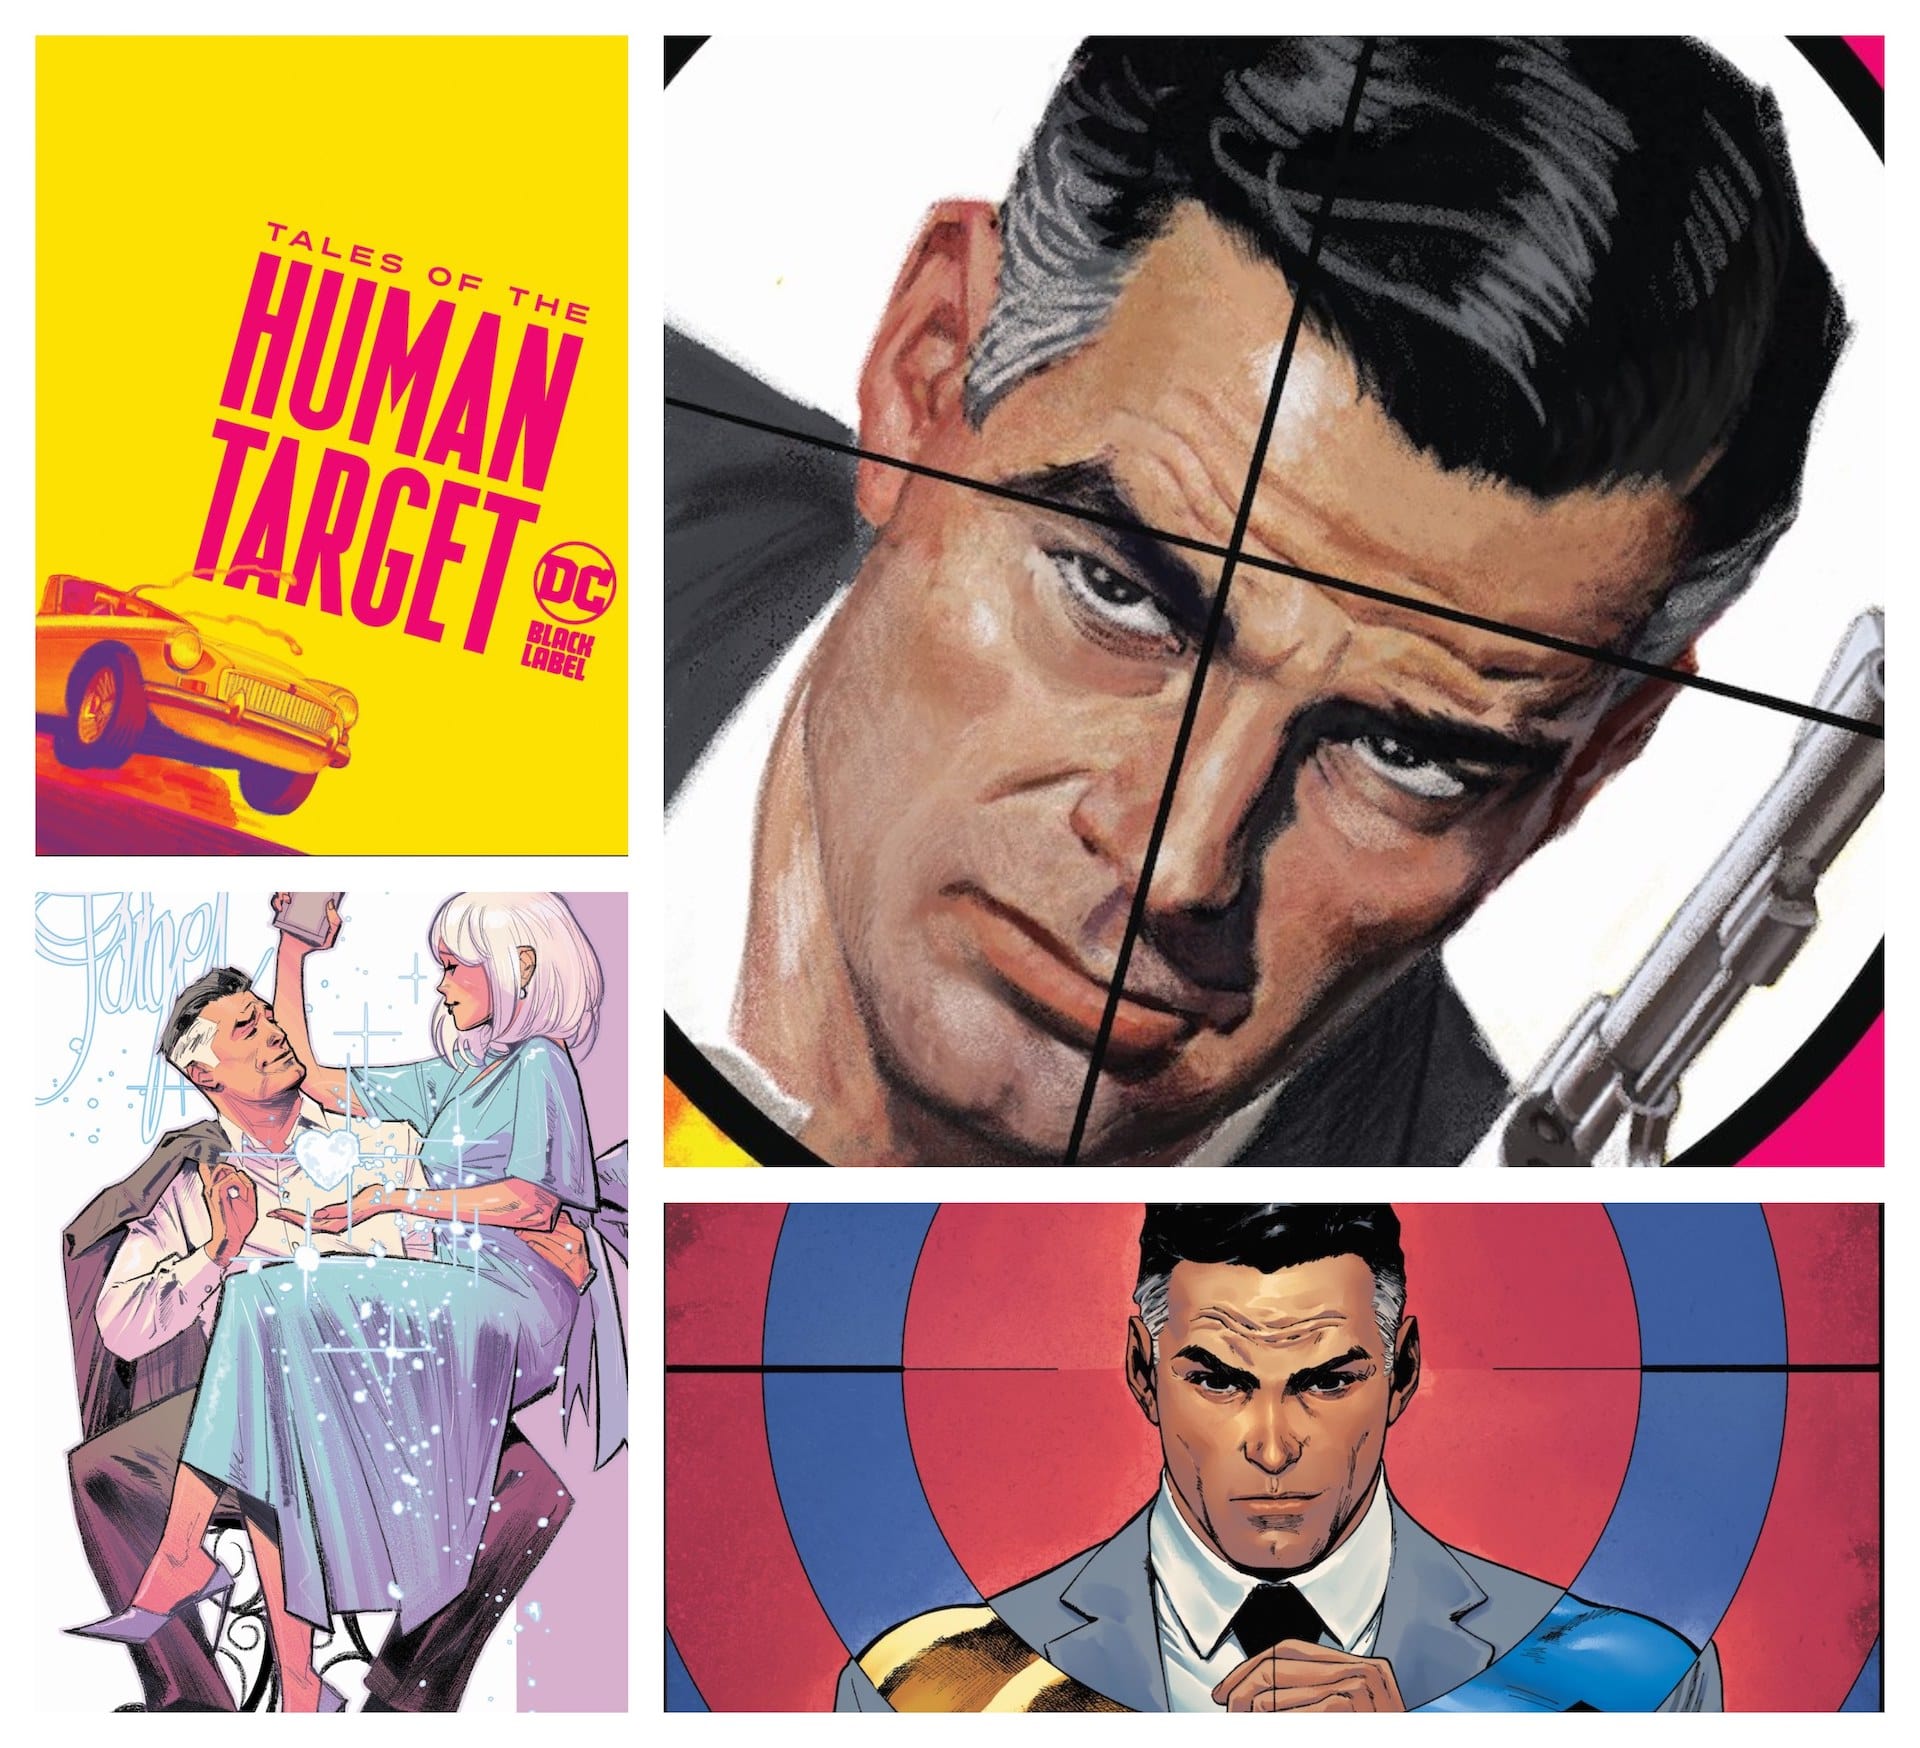 'Tales of The Human Target' anthology one-shot coming August 23rd